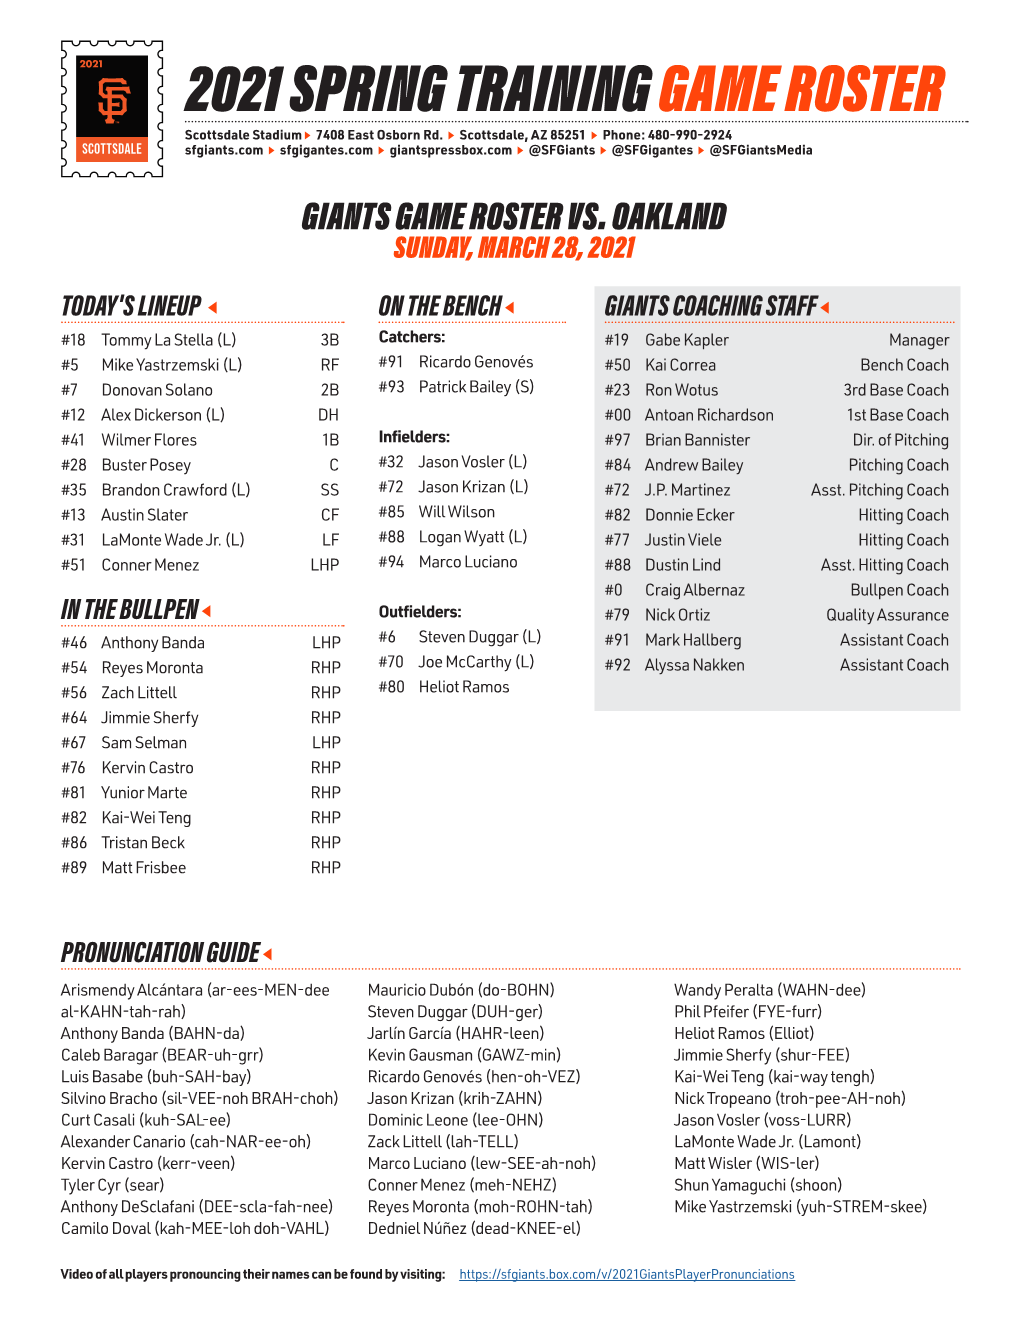 03-28-2021 Giants Roster